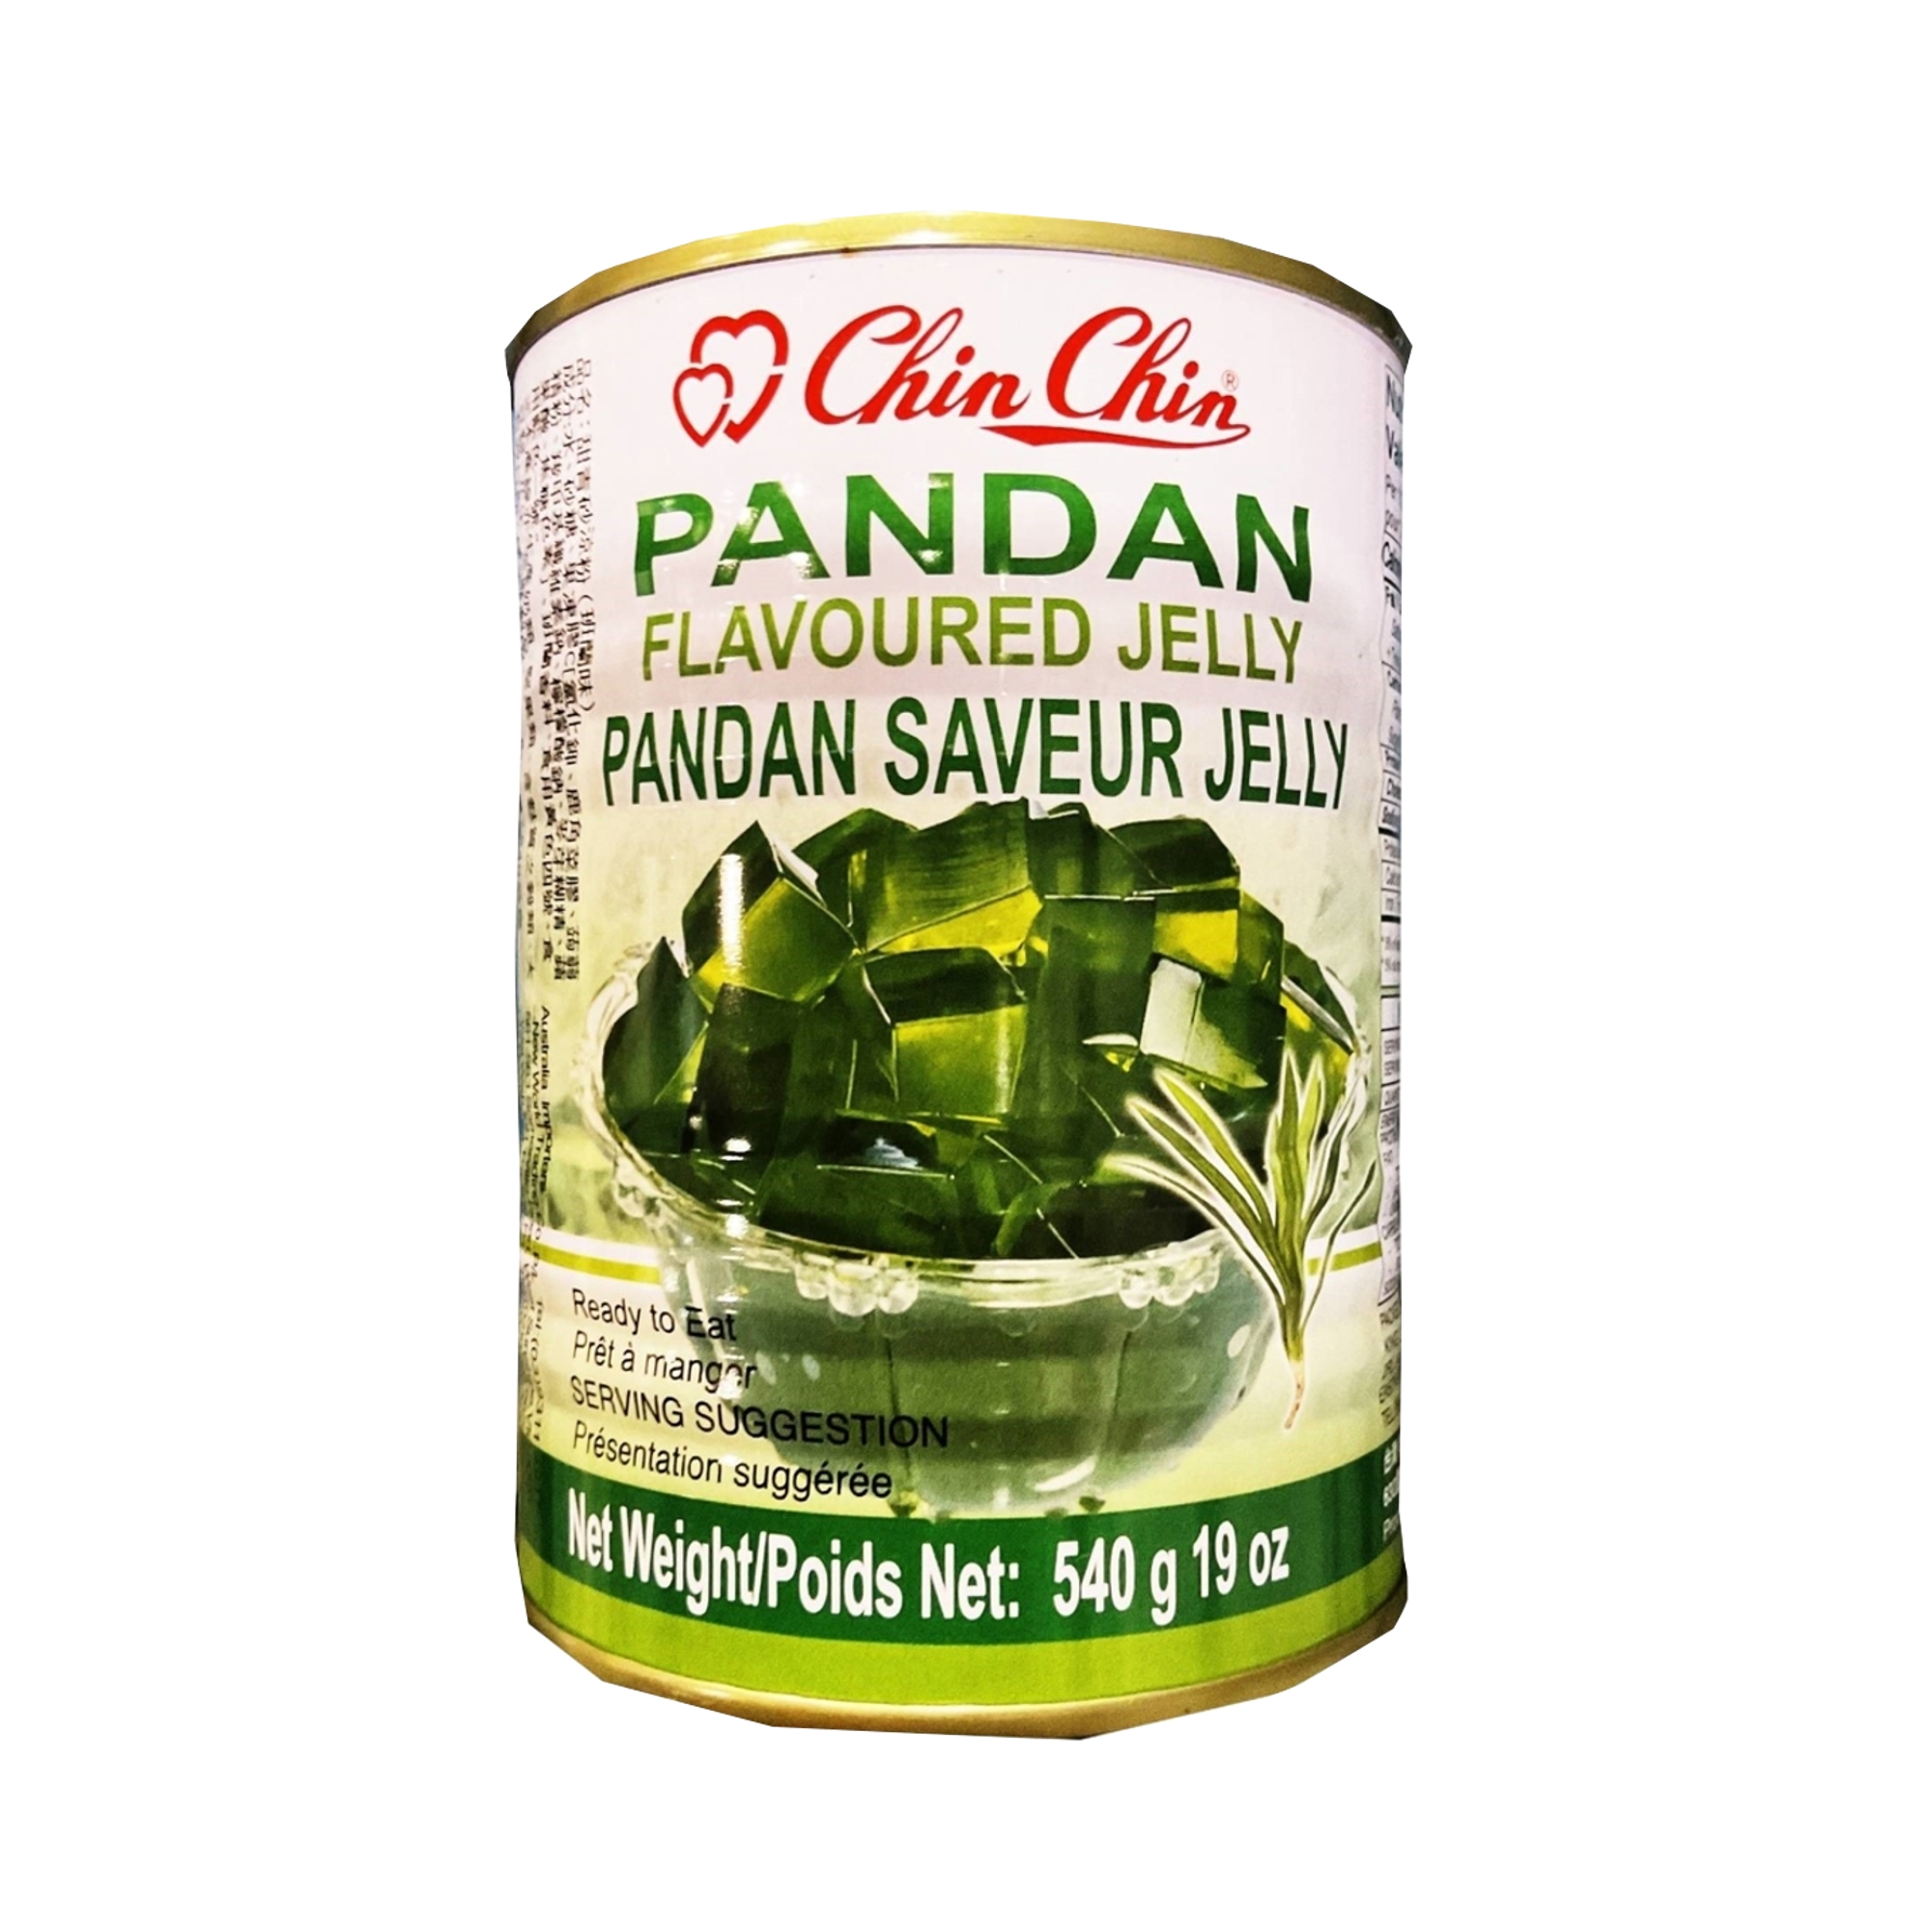 CHEN CHEN PANDAN FLAVOURED JELLY DR110220